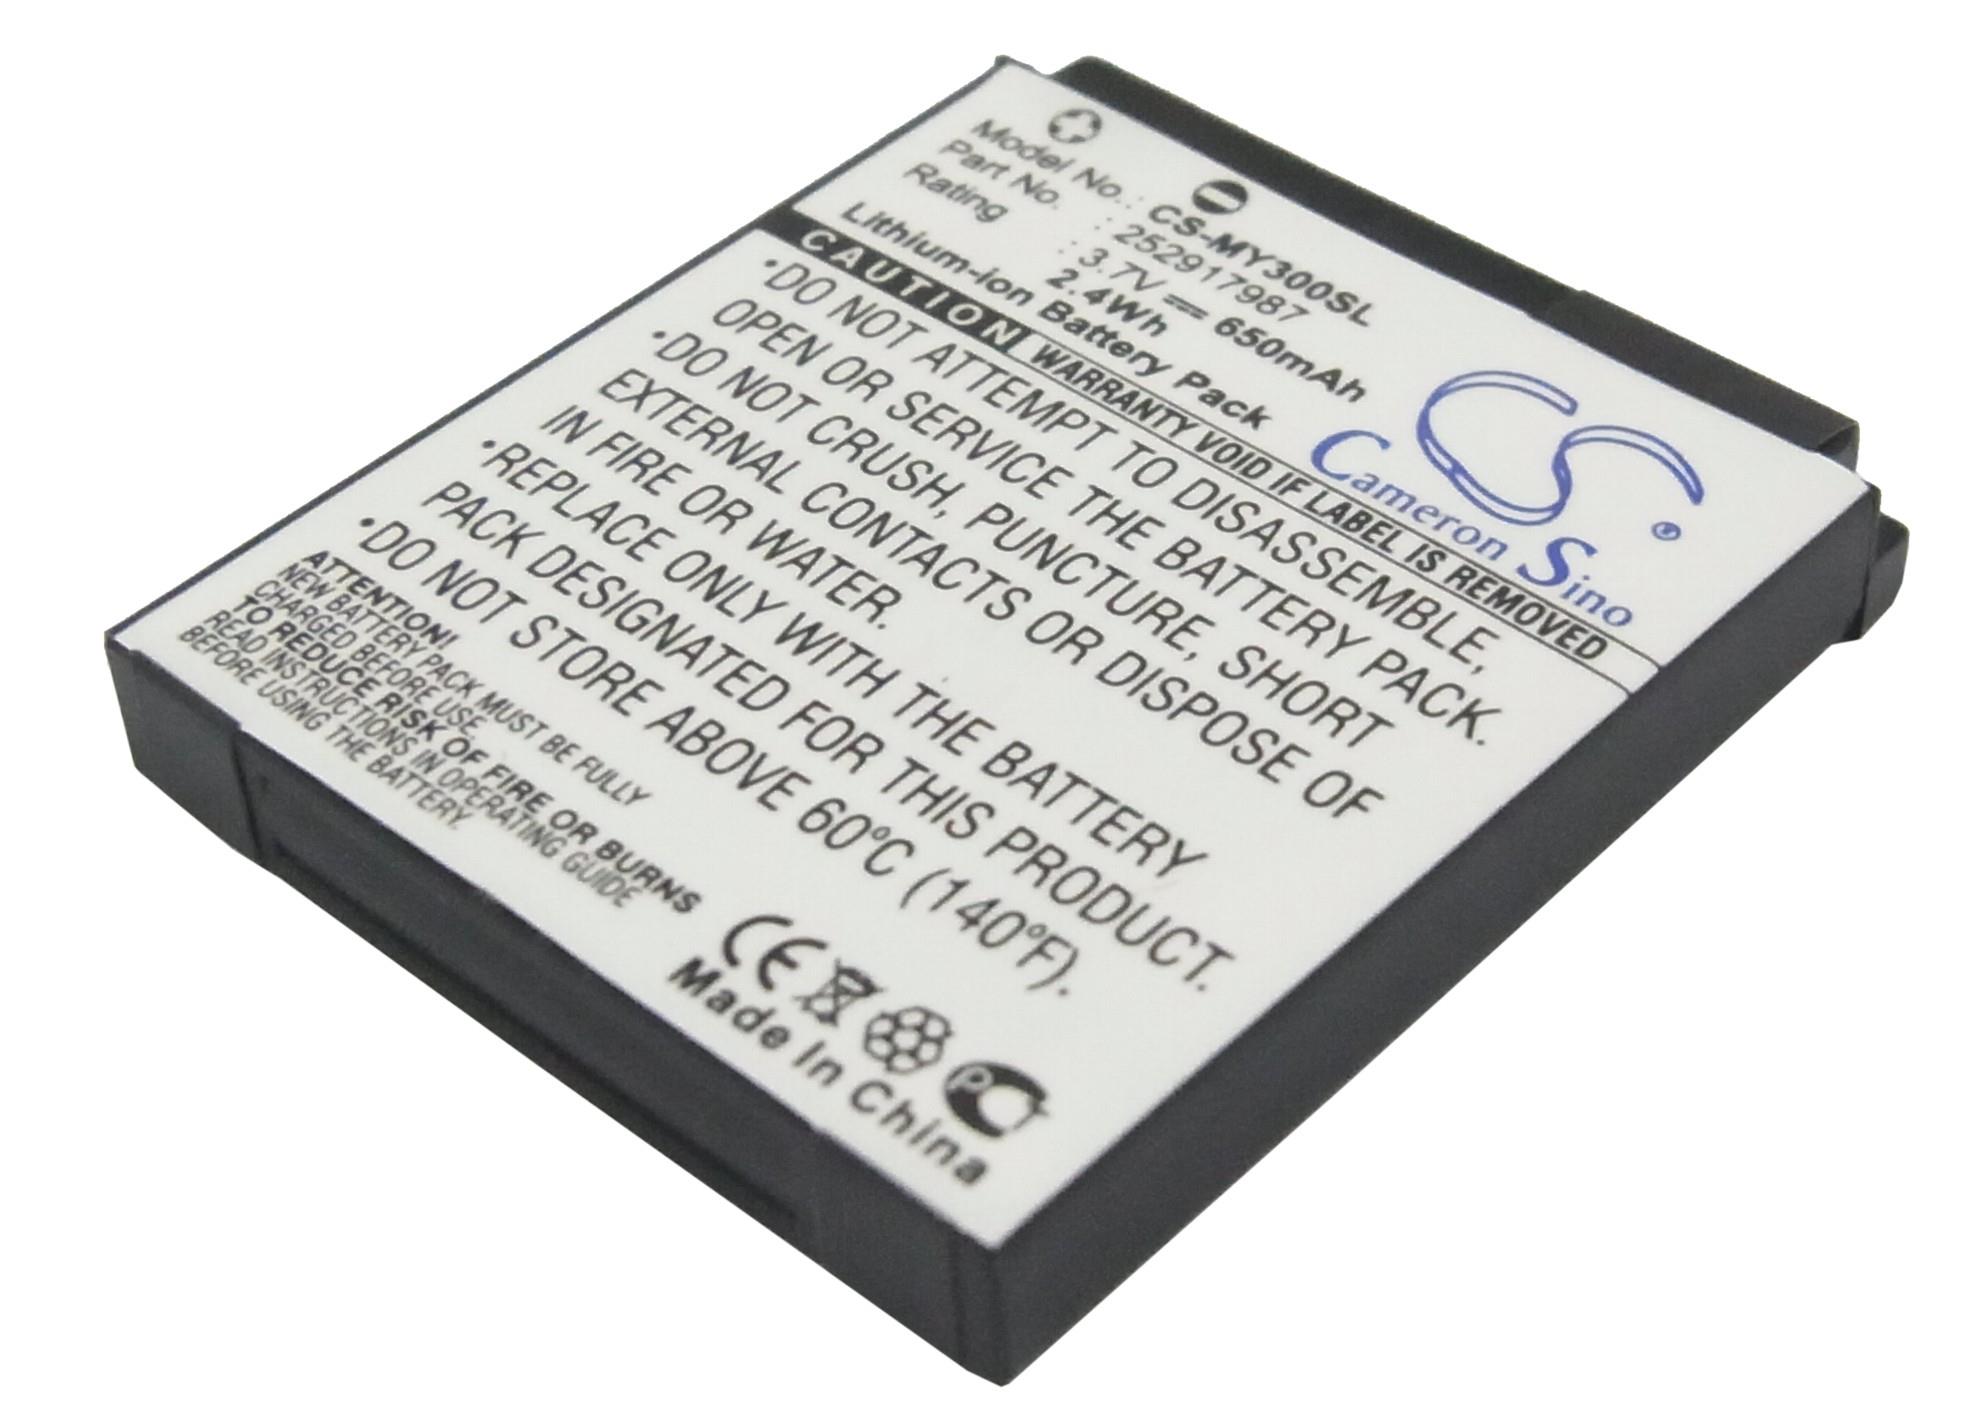 VinTrons Replacement Battery 650mAh/2.4Wh For SAGEM MY200, MY 200, MY200c, MY202, MY 202, MY202c, MY 202C, MY213x, MY 213x, MY300